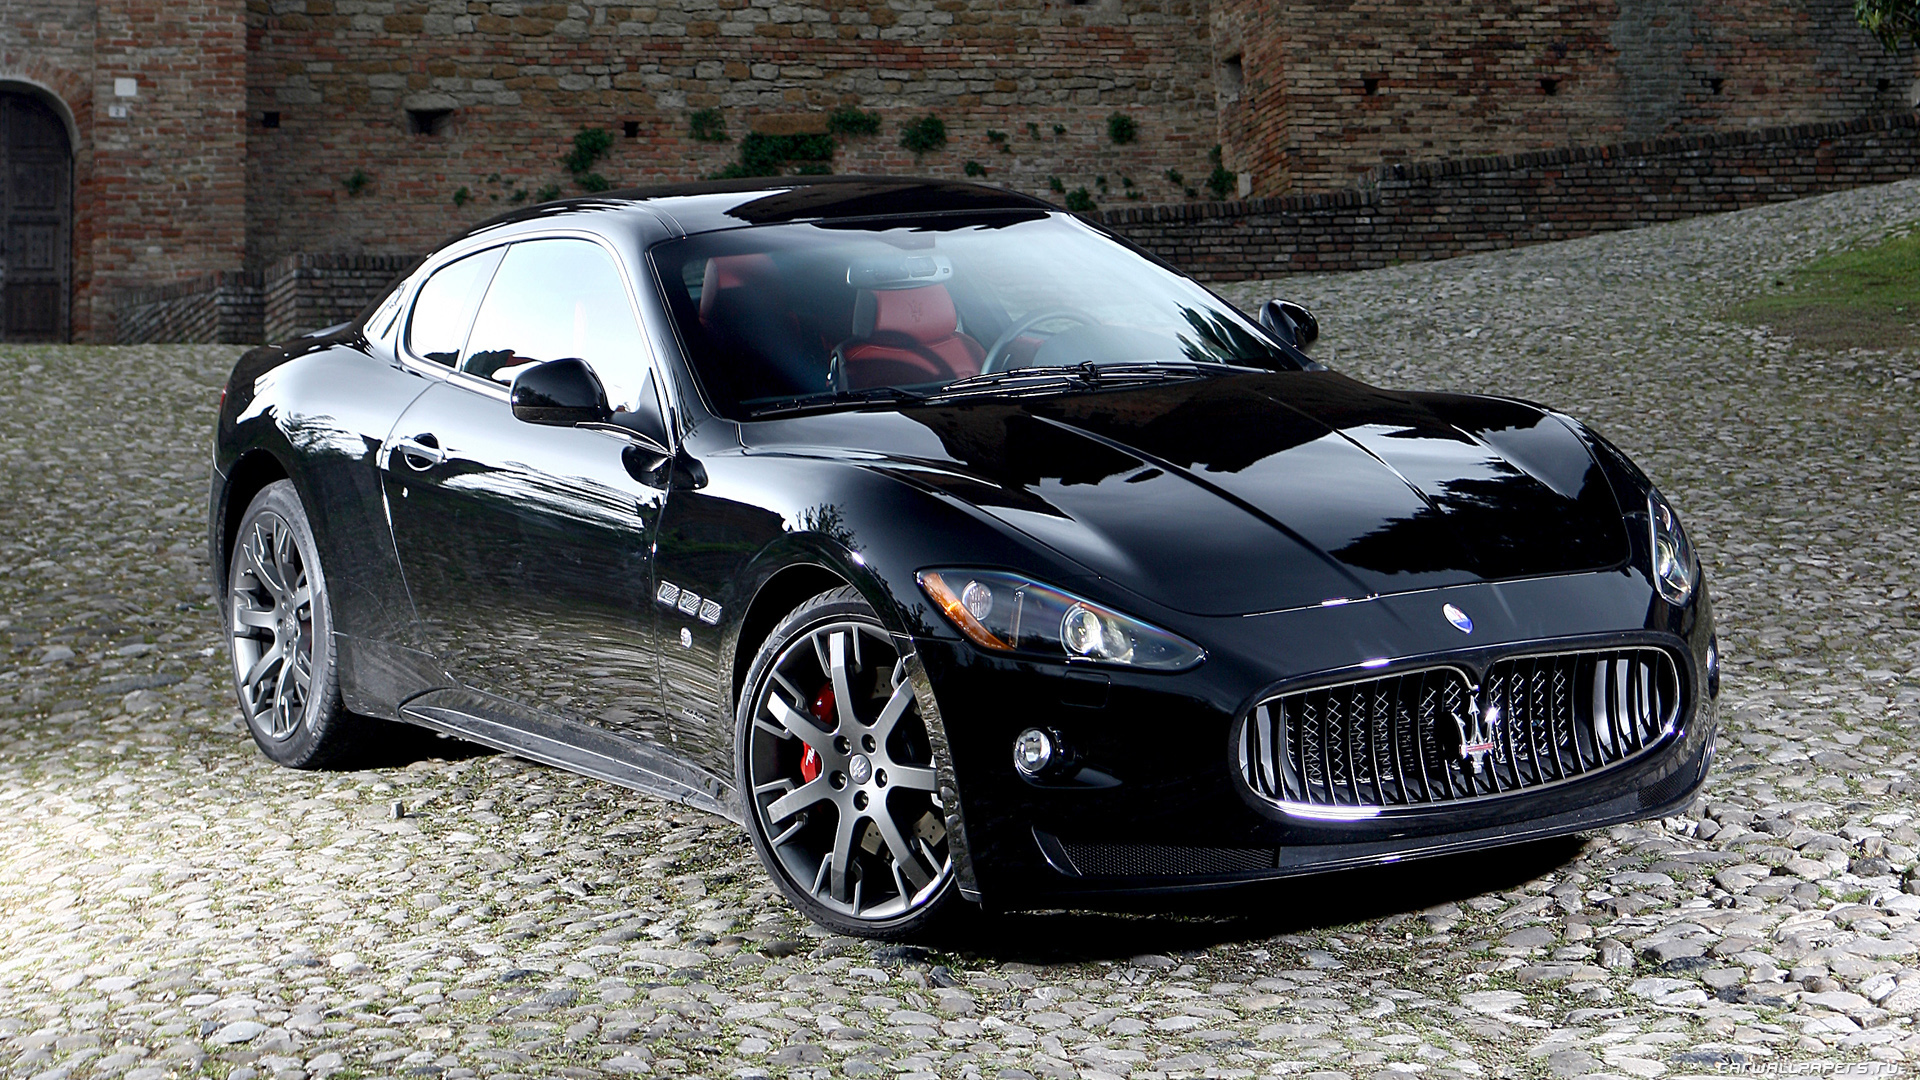 Exotic Car Maker Maserati Has Over 250% Sales Jump In 2014 in Pacific Region – www.philippineslifestyle.com